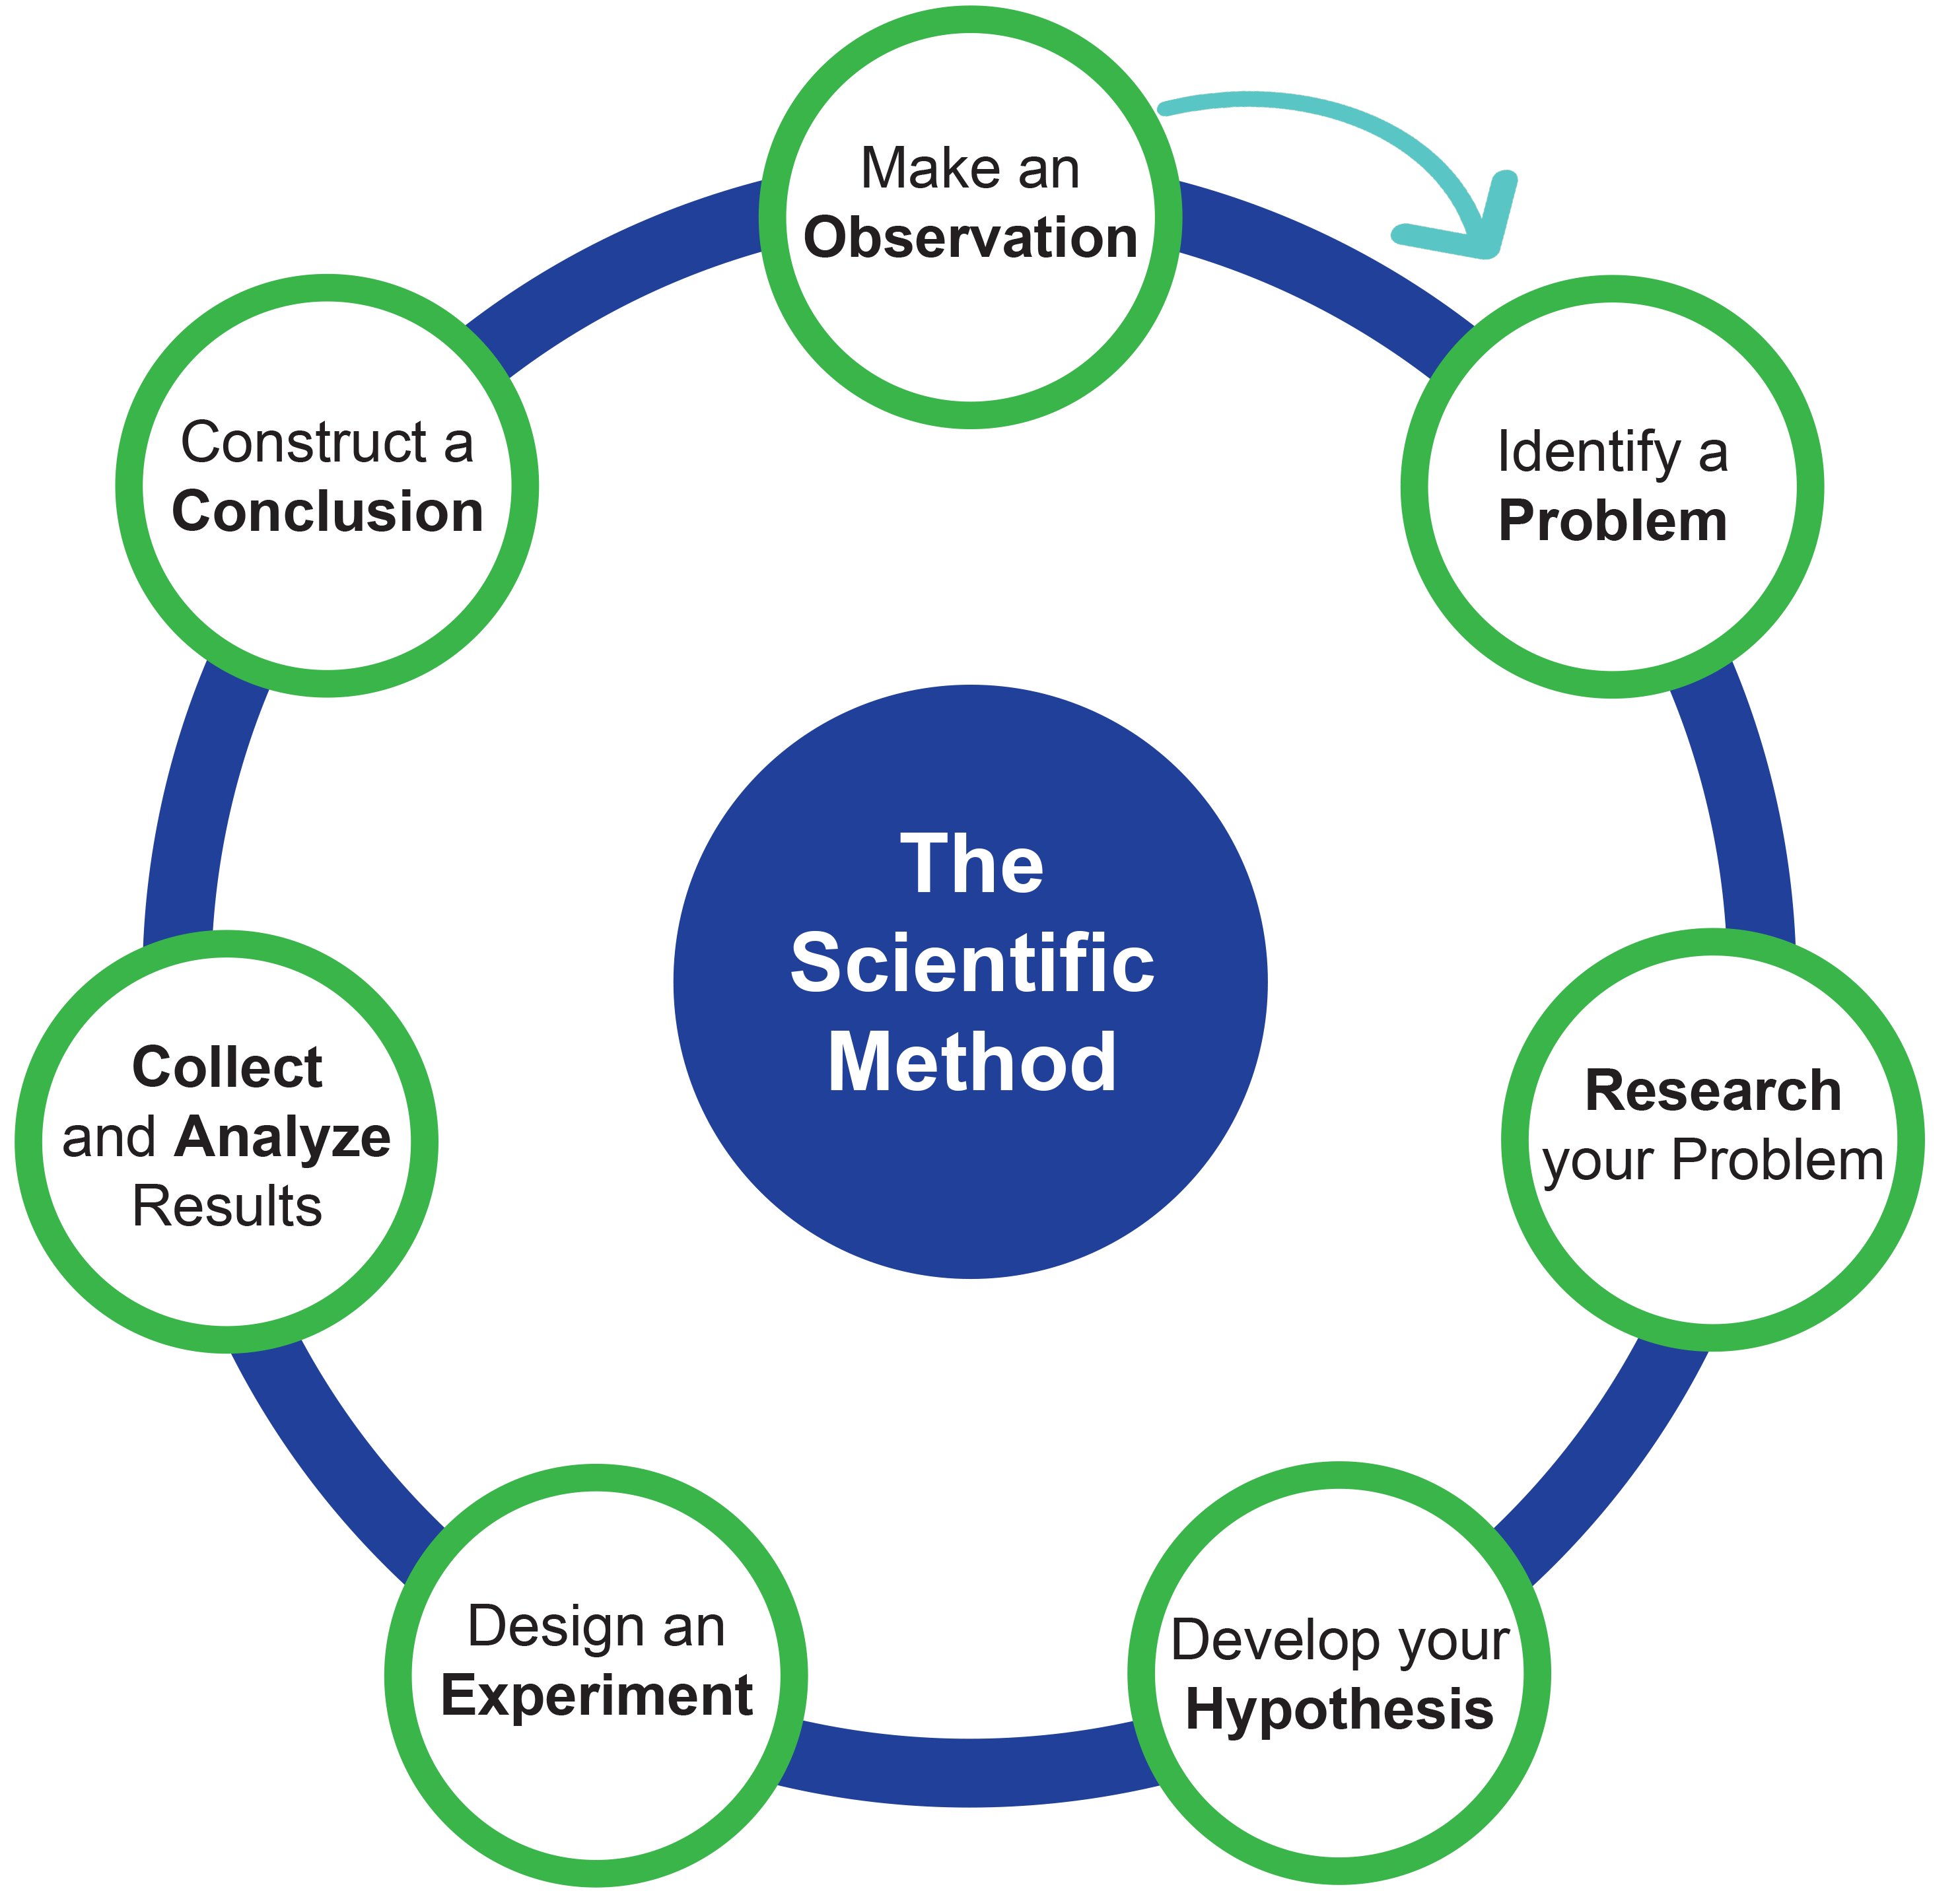 the scientific method is said to involve critical thinking